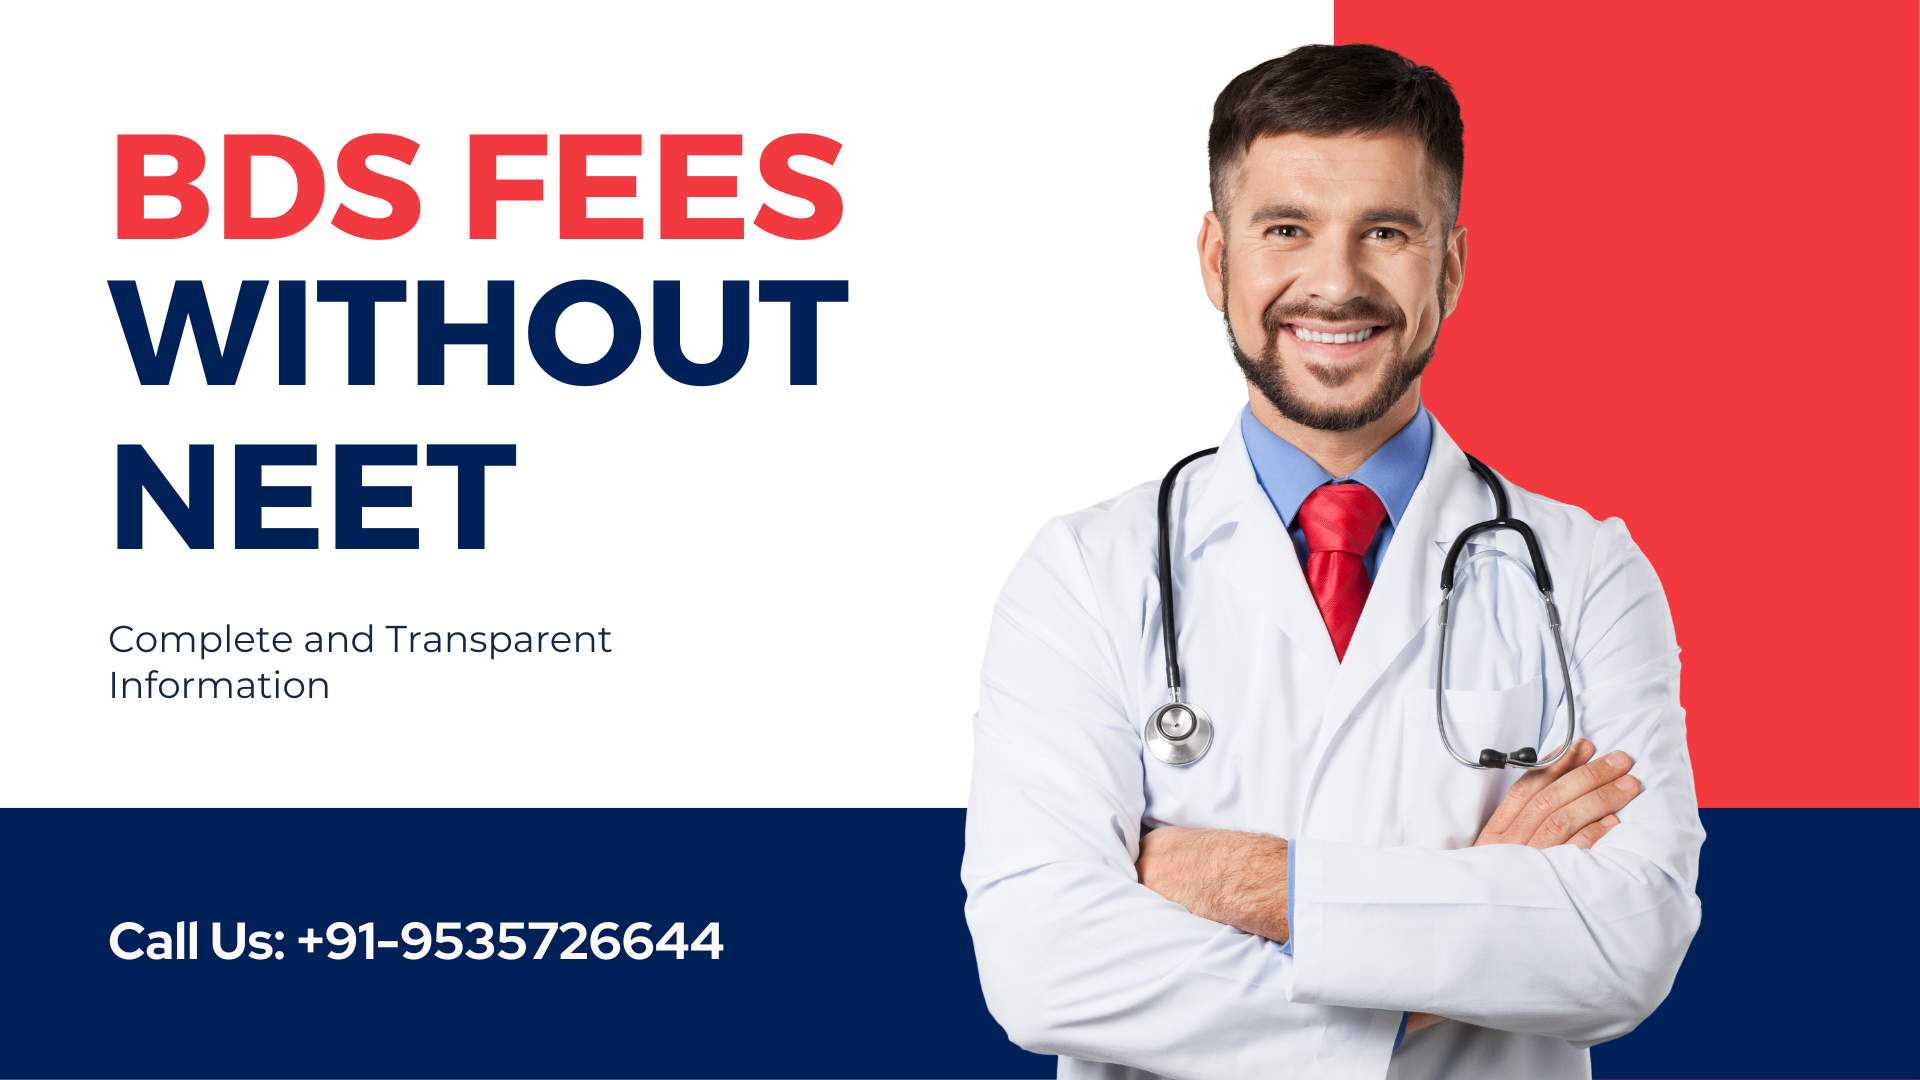 BDS Fees without NEET in India